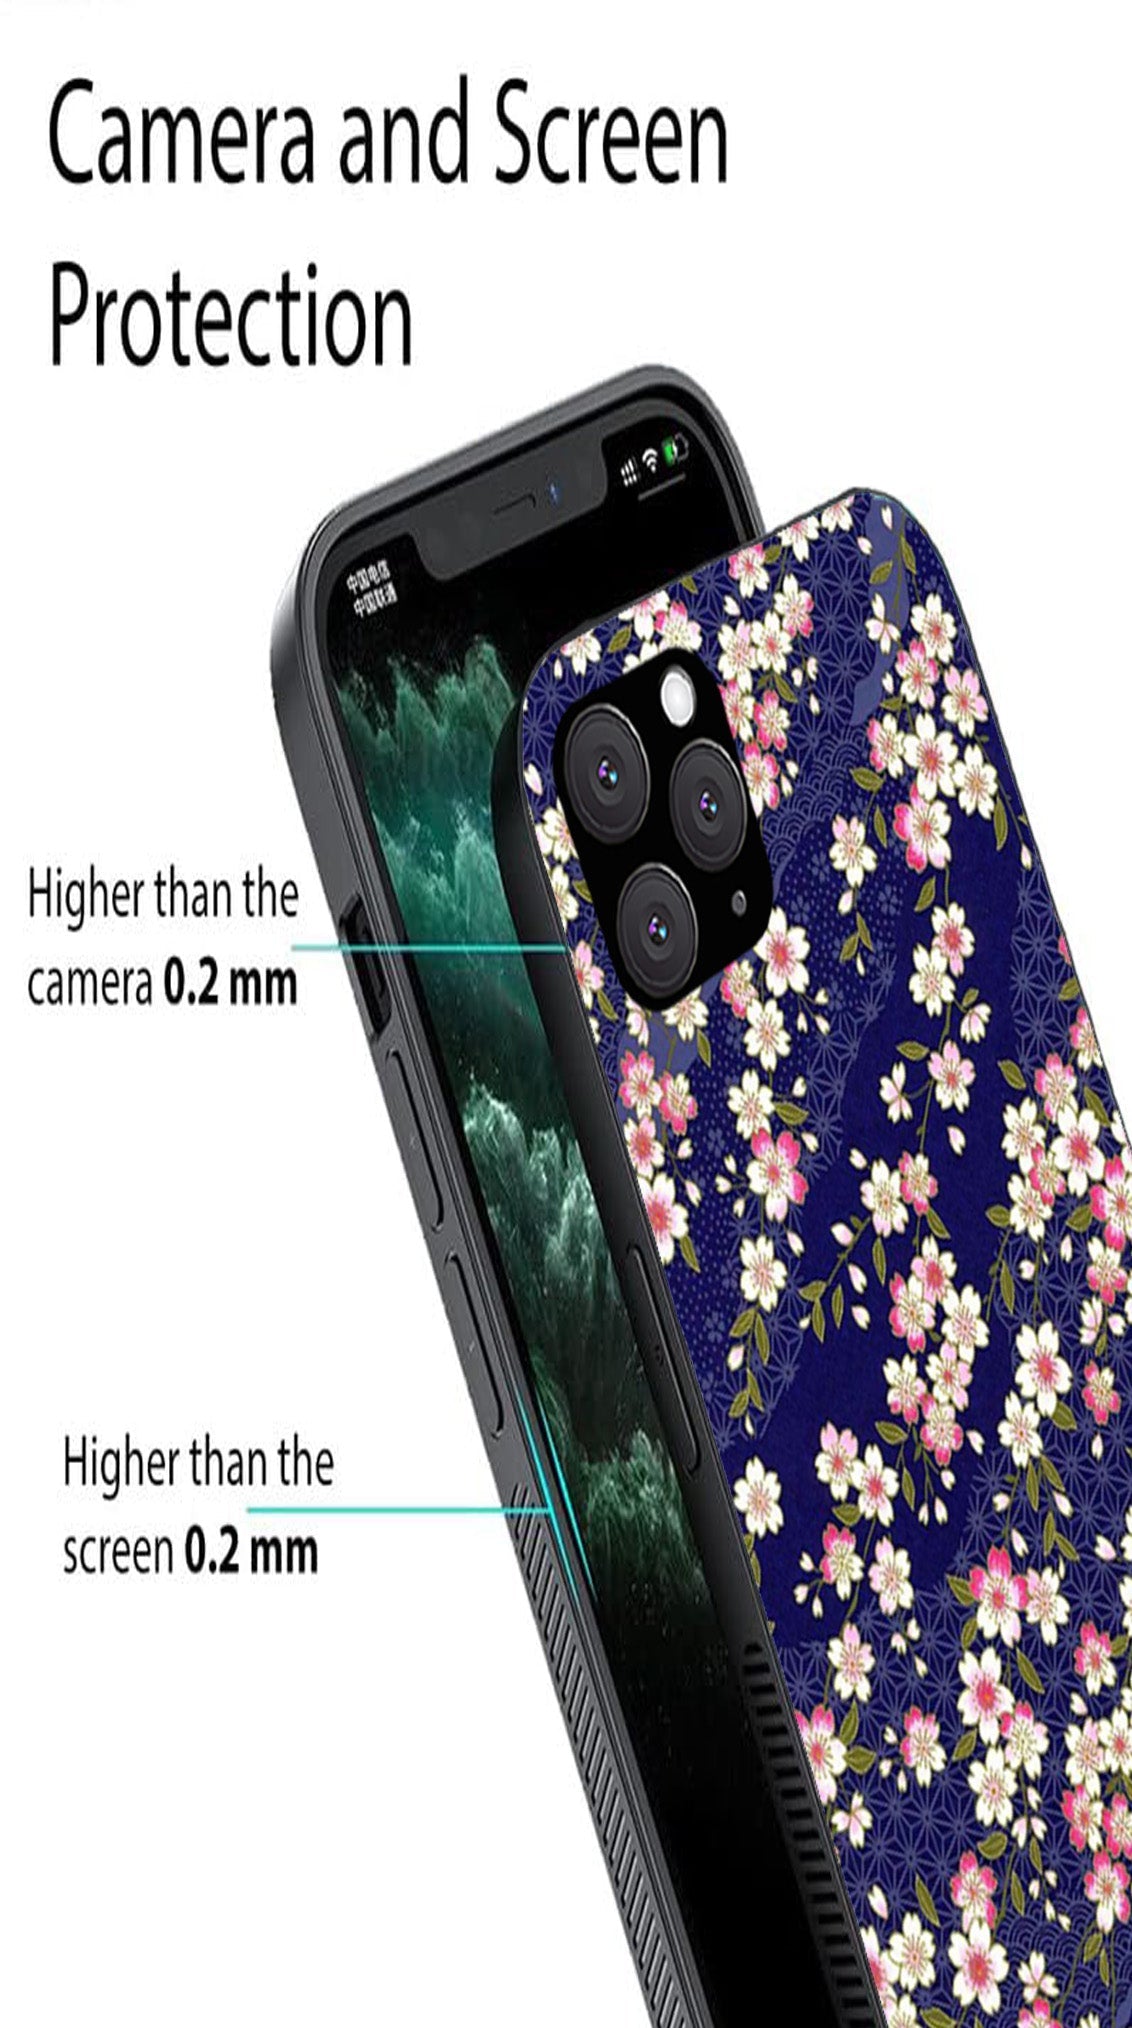 Flower Design Metal Mobile Case for iPhone 11 Pro Max